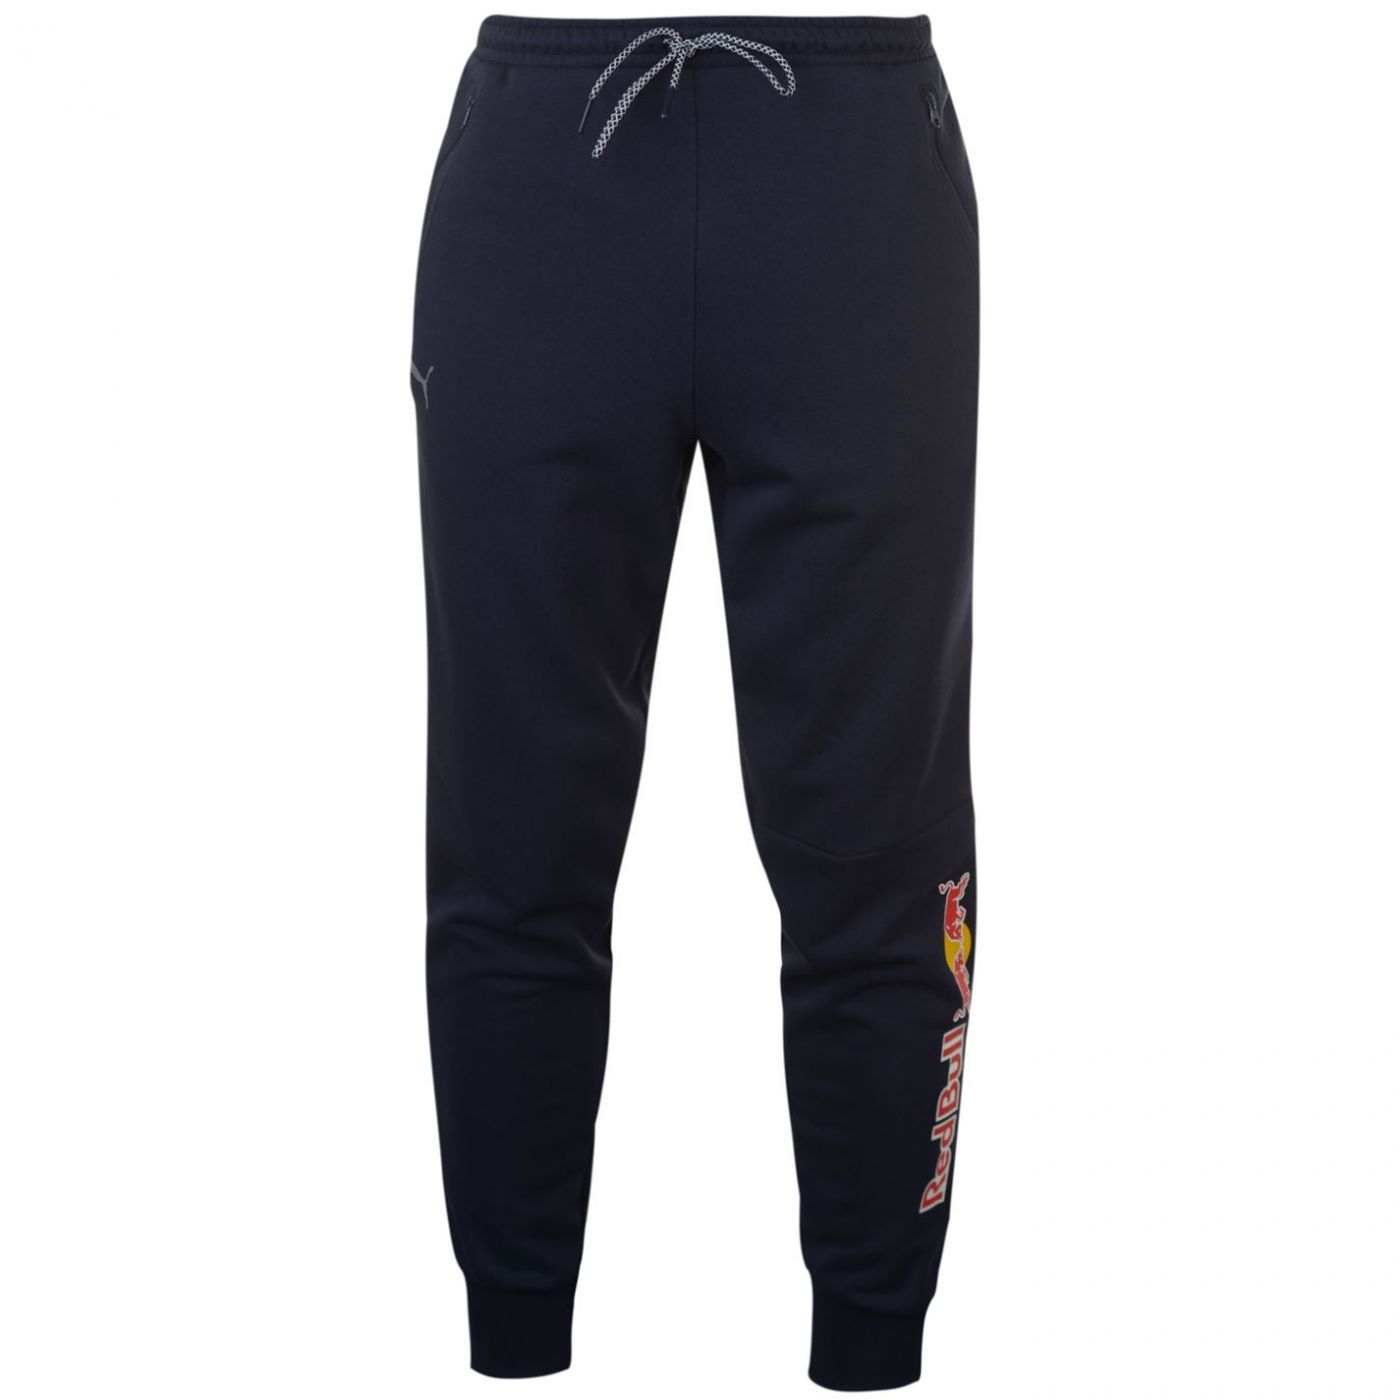 red bull joggers